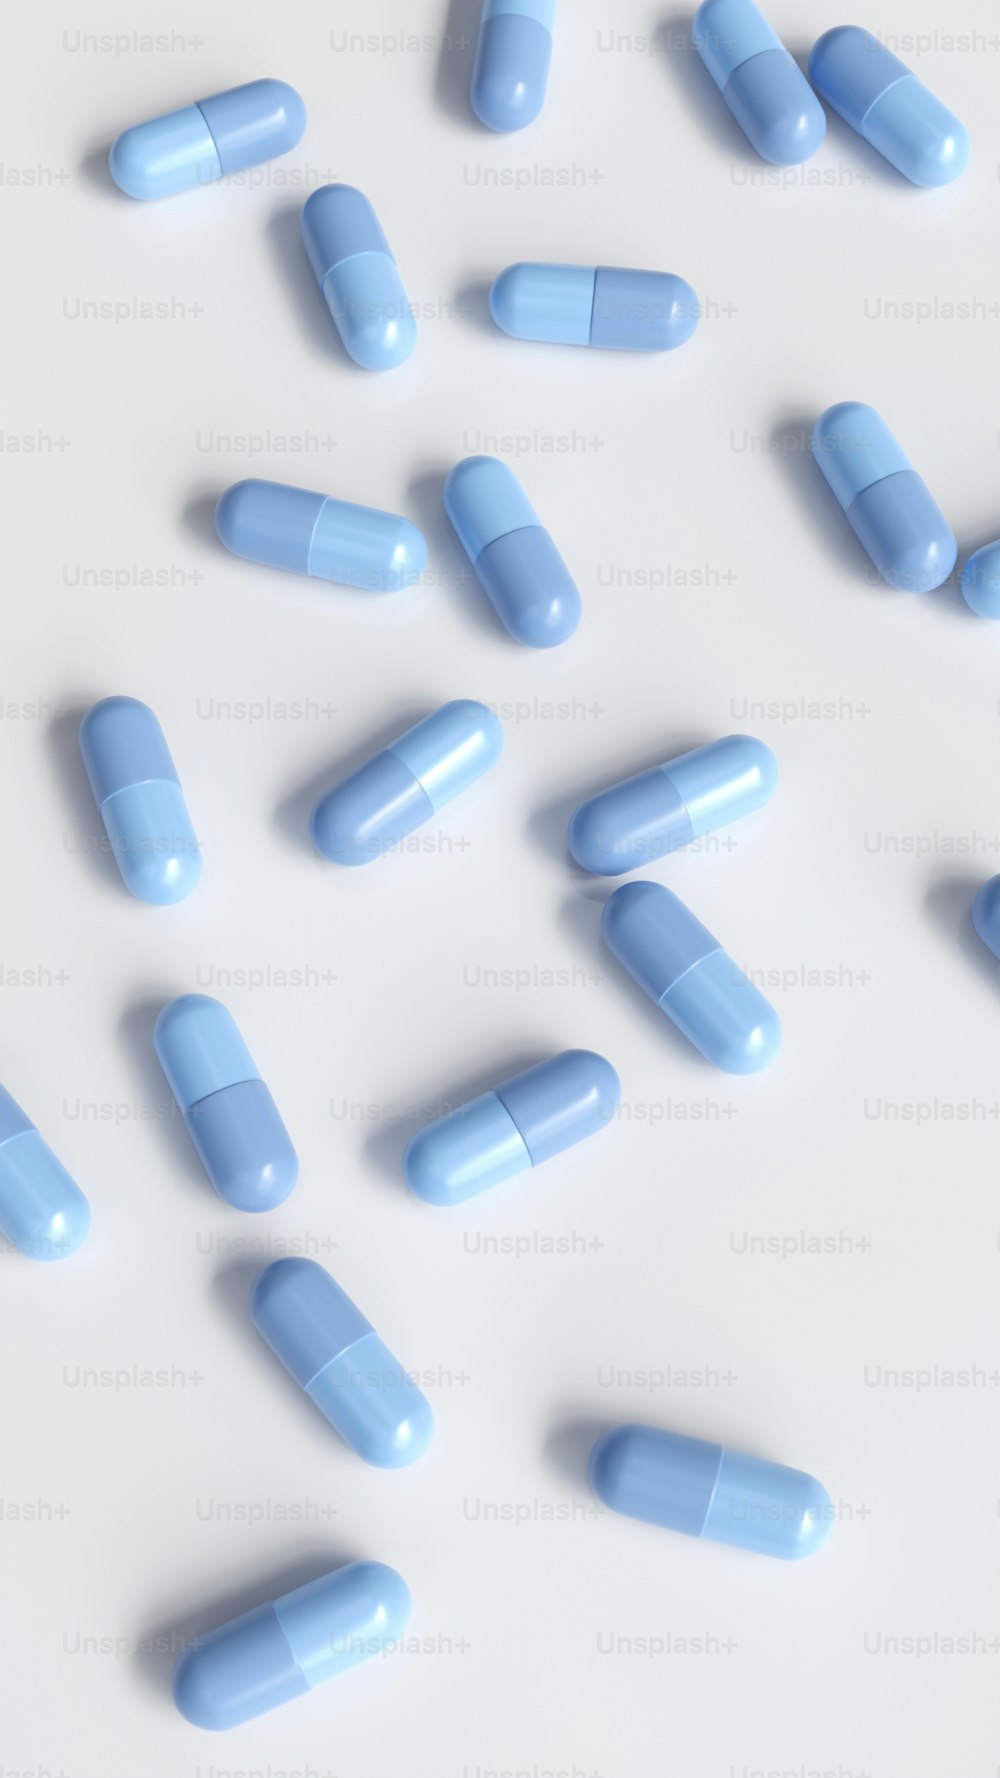 blue pills are scattered on a white surface